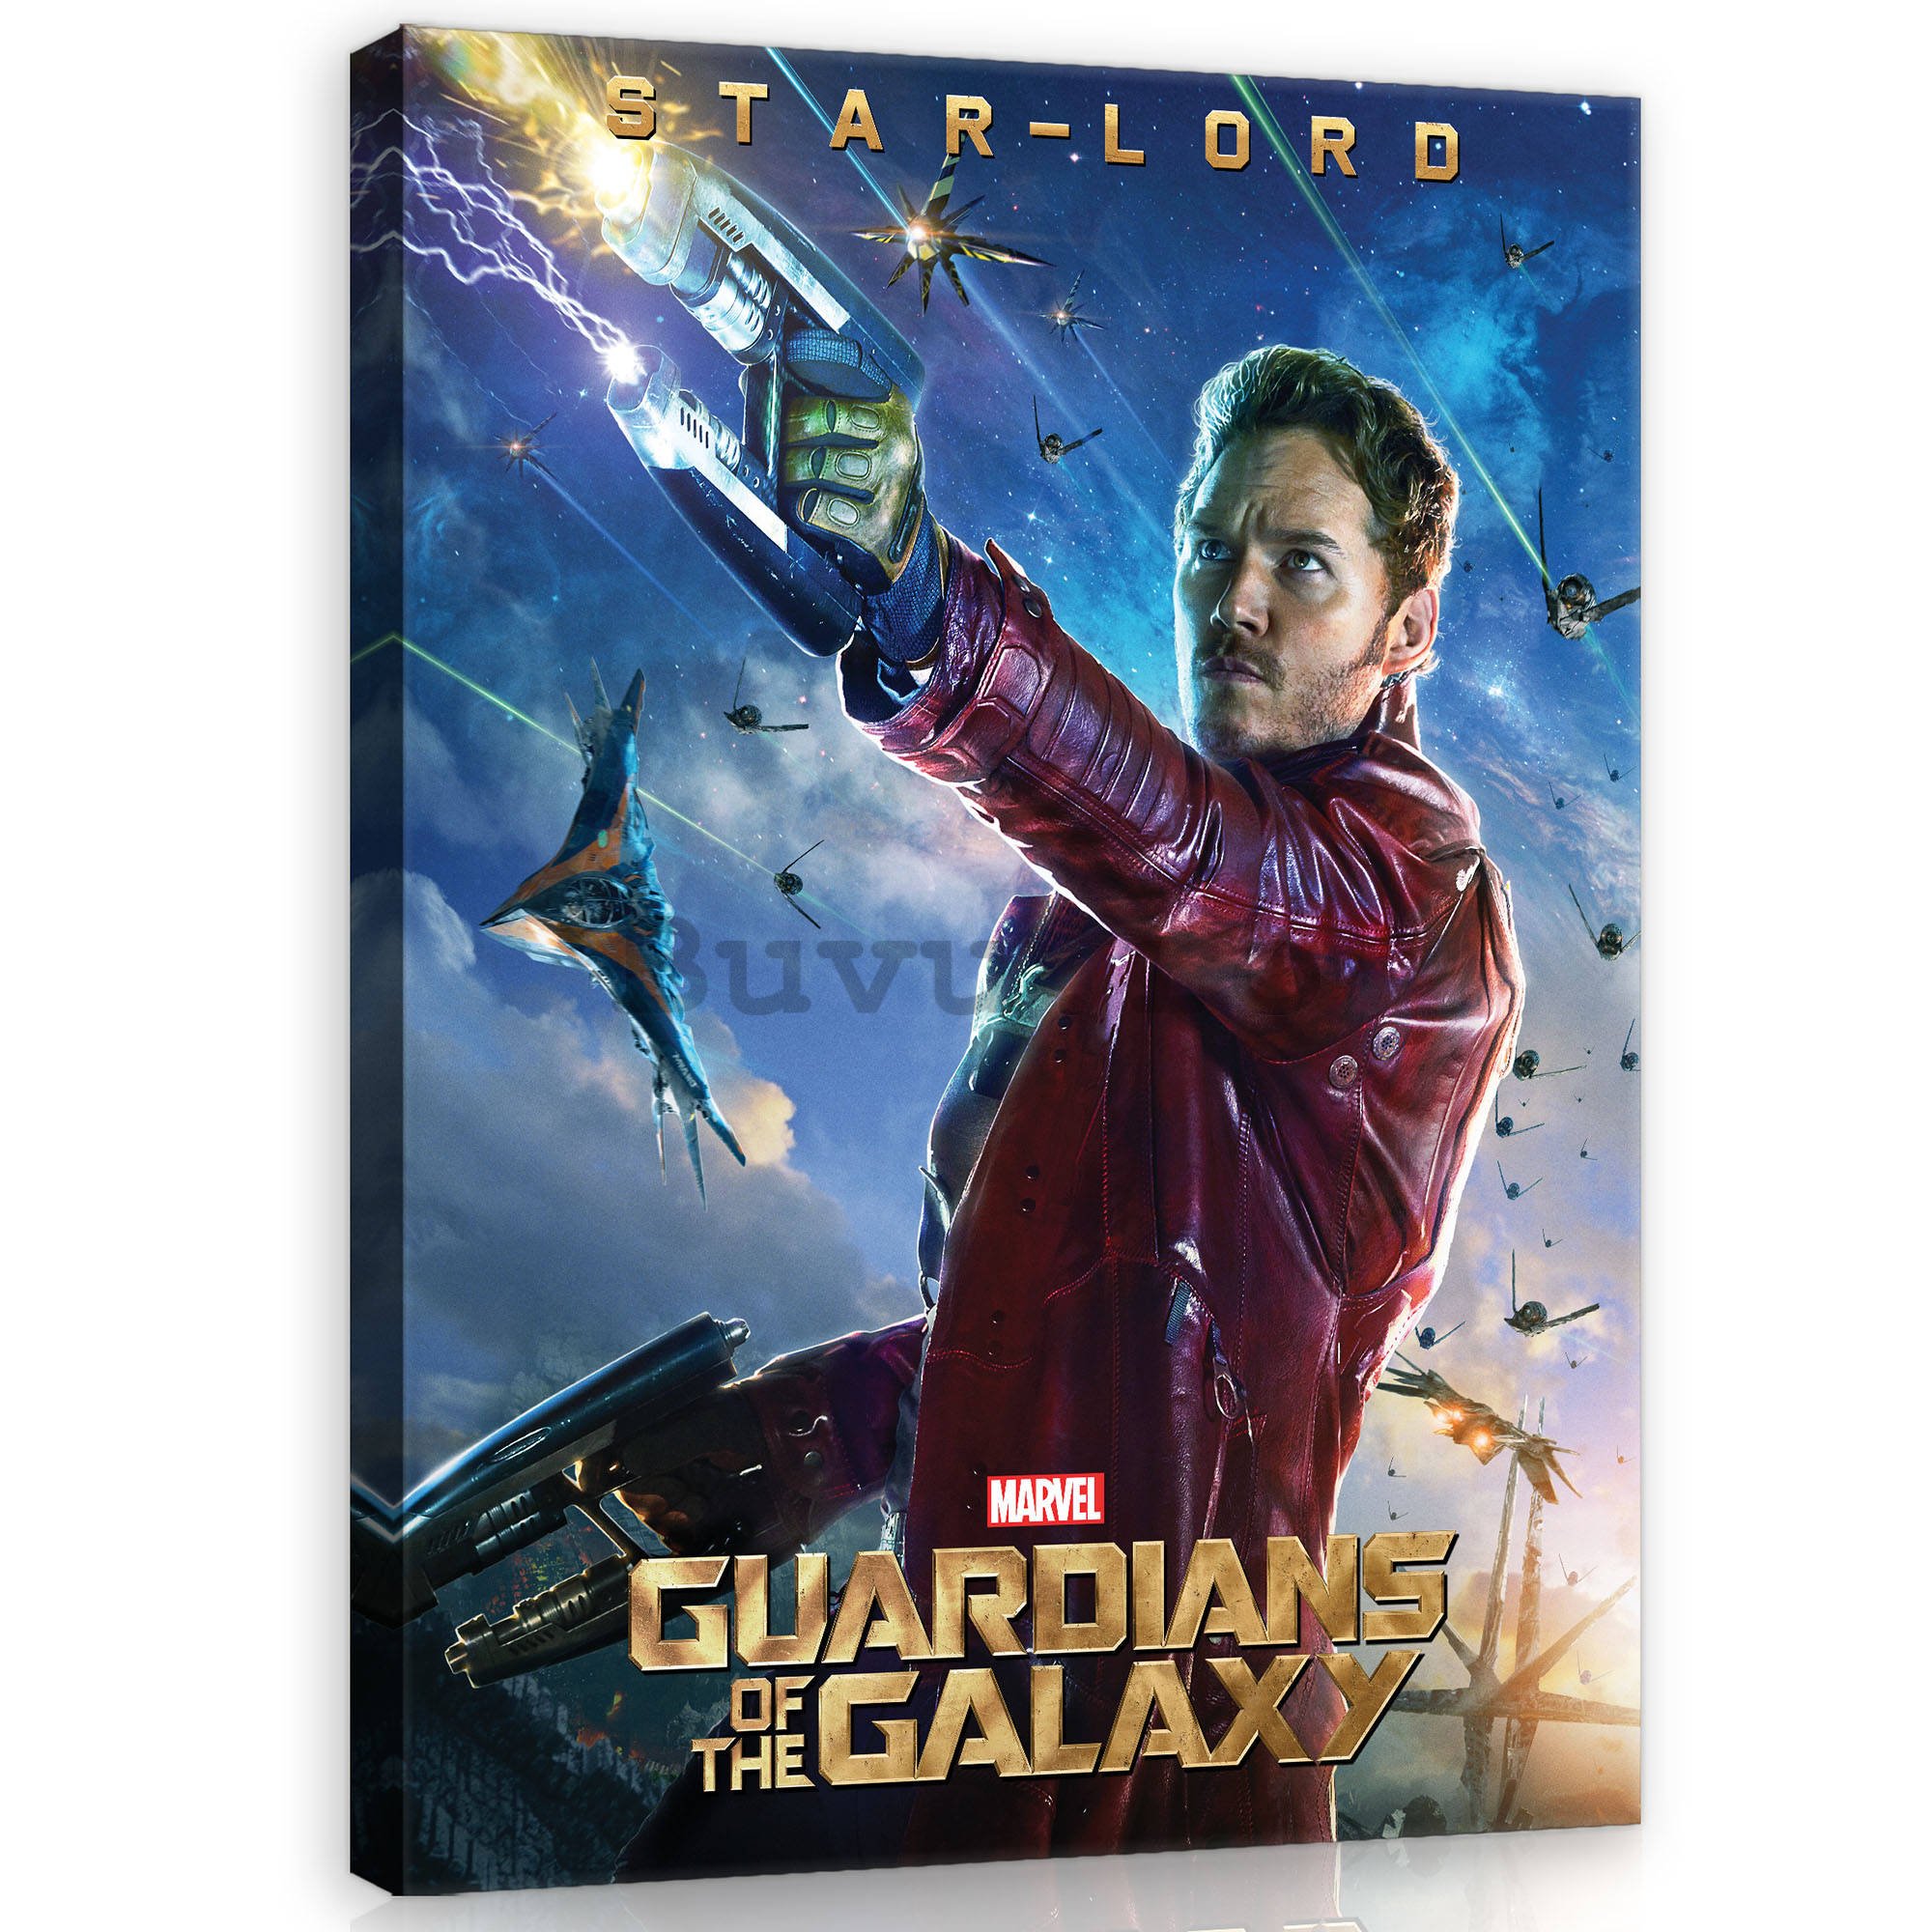 Tablou canvas: Guardians of The Galaxy Star-Lord - 75x100 cm